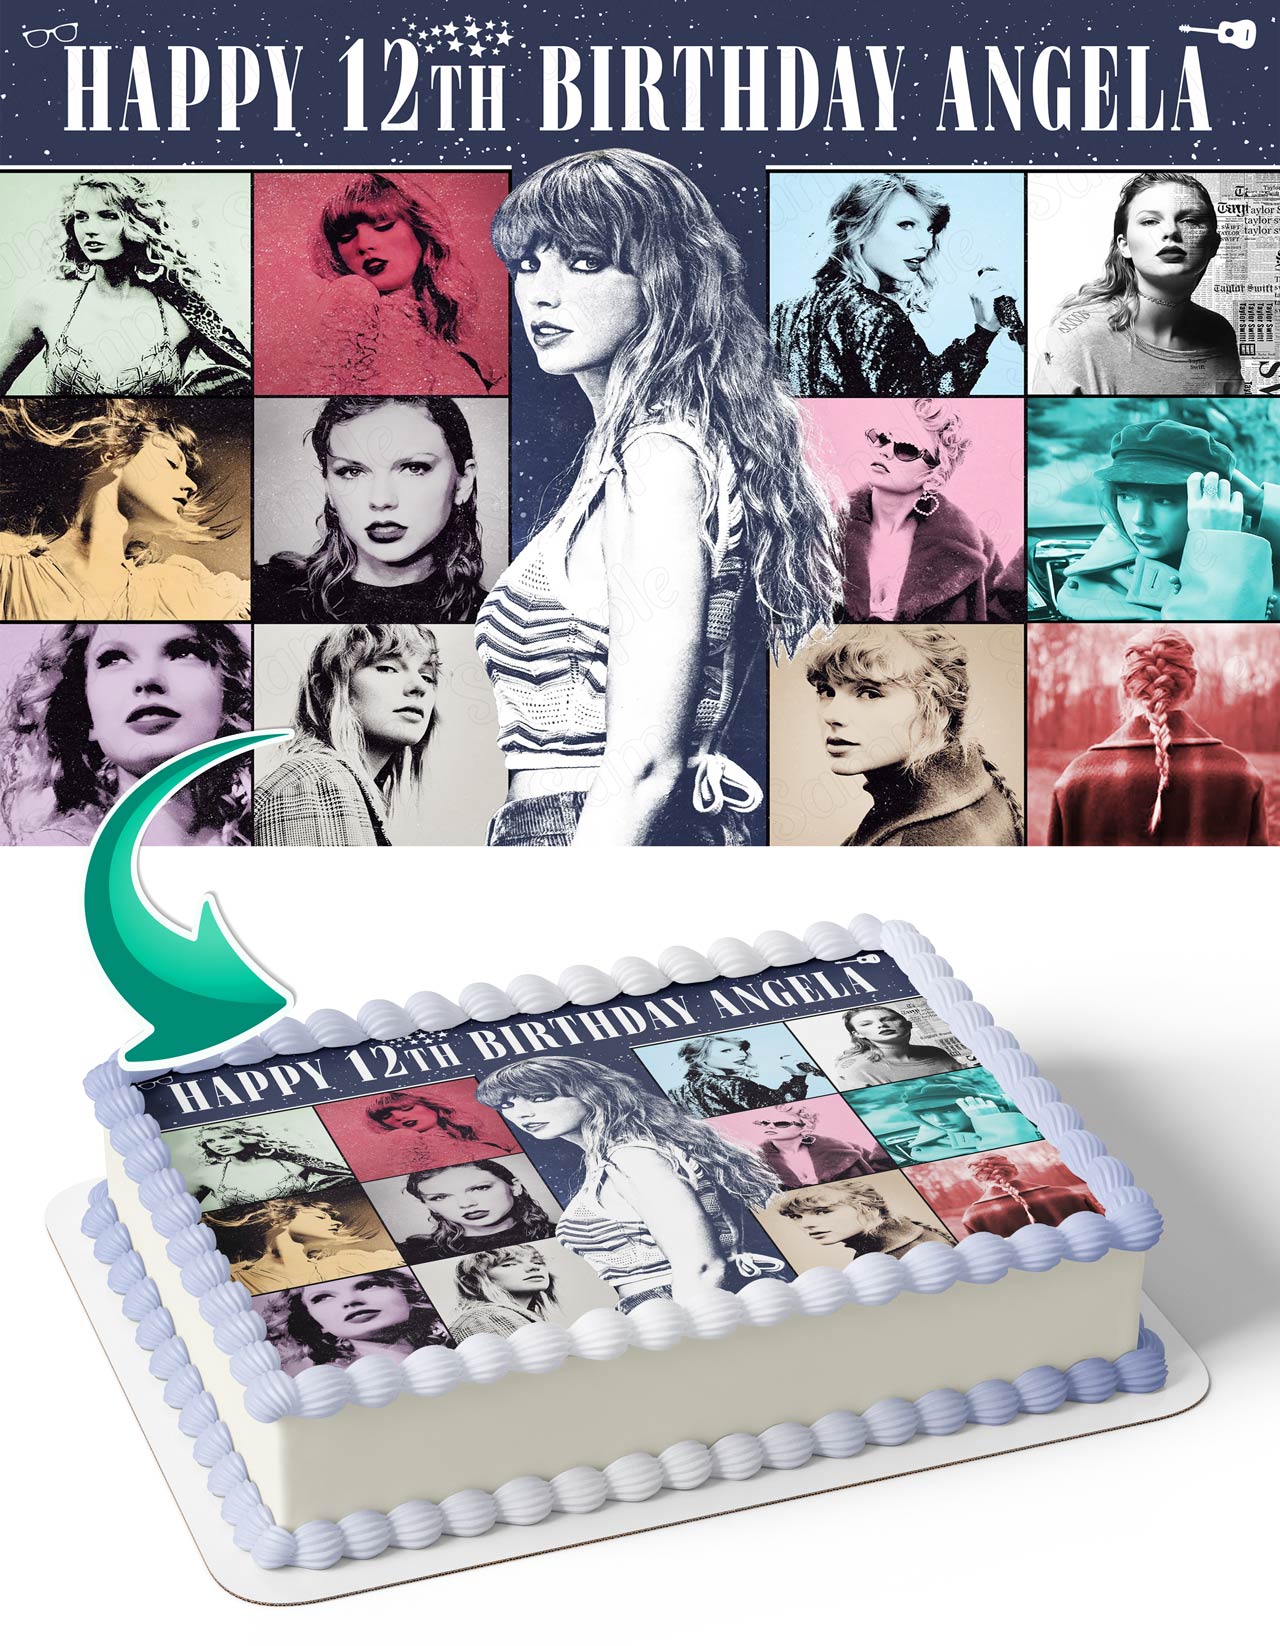 How to Turn Someone's Face into a Cake - Taylor Swift Cake 